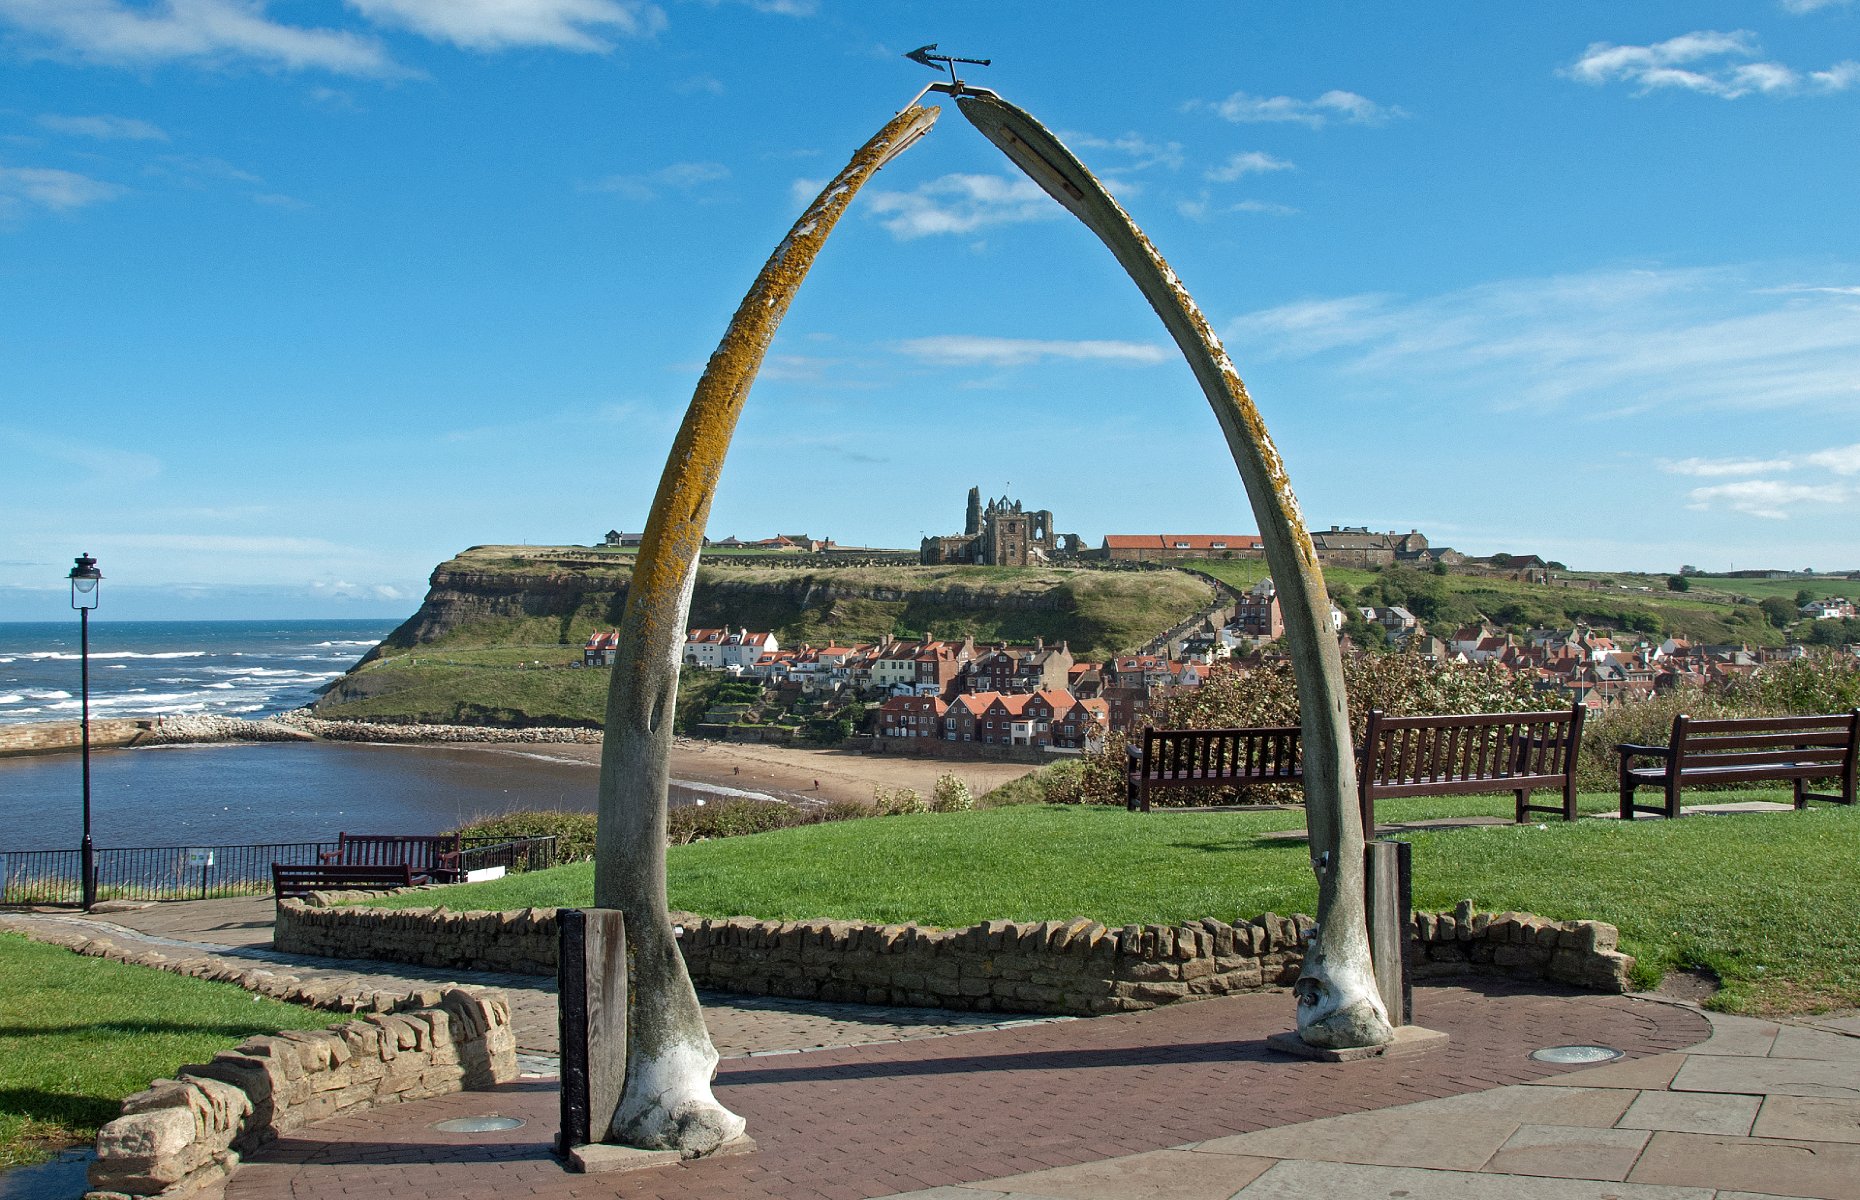 The whale bone arch (Image: Peter Wooton/Shutterstock)